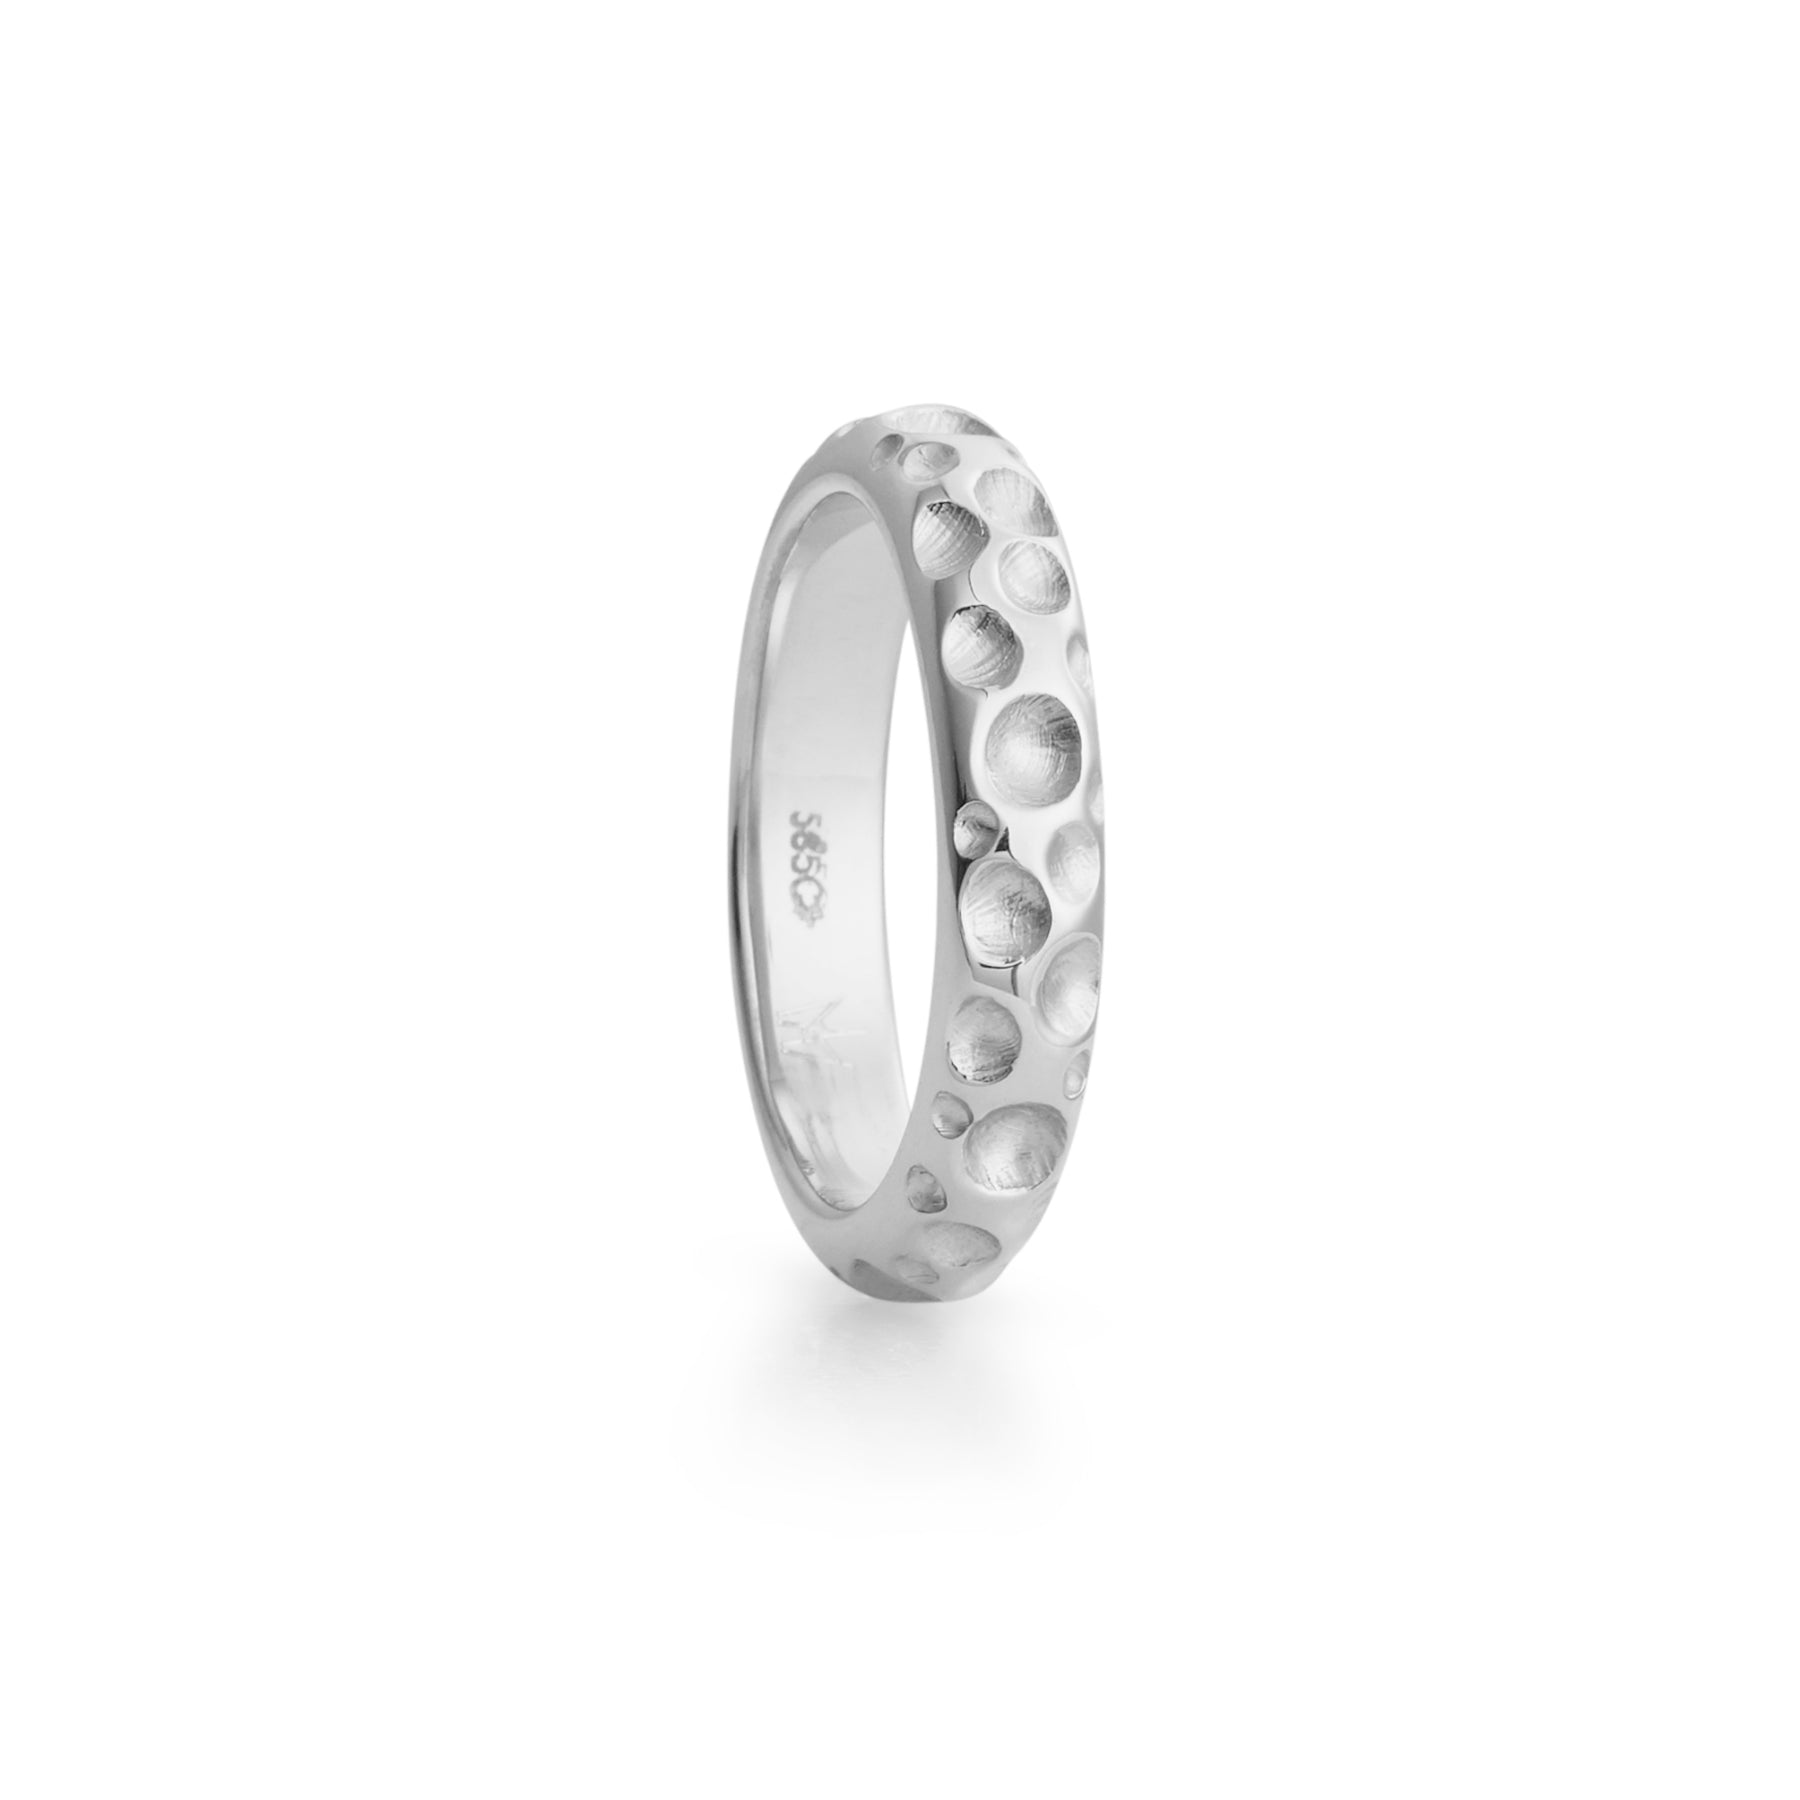 Bubble ring in white gold, ladies